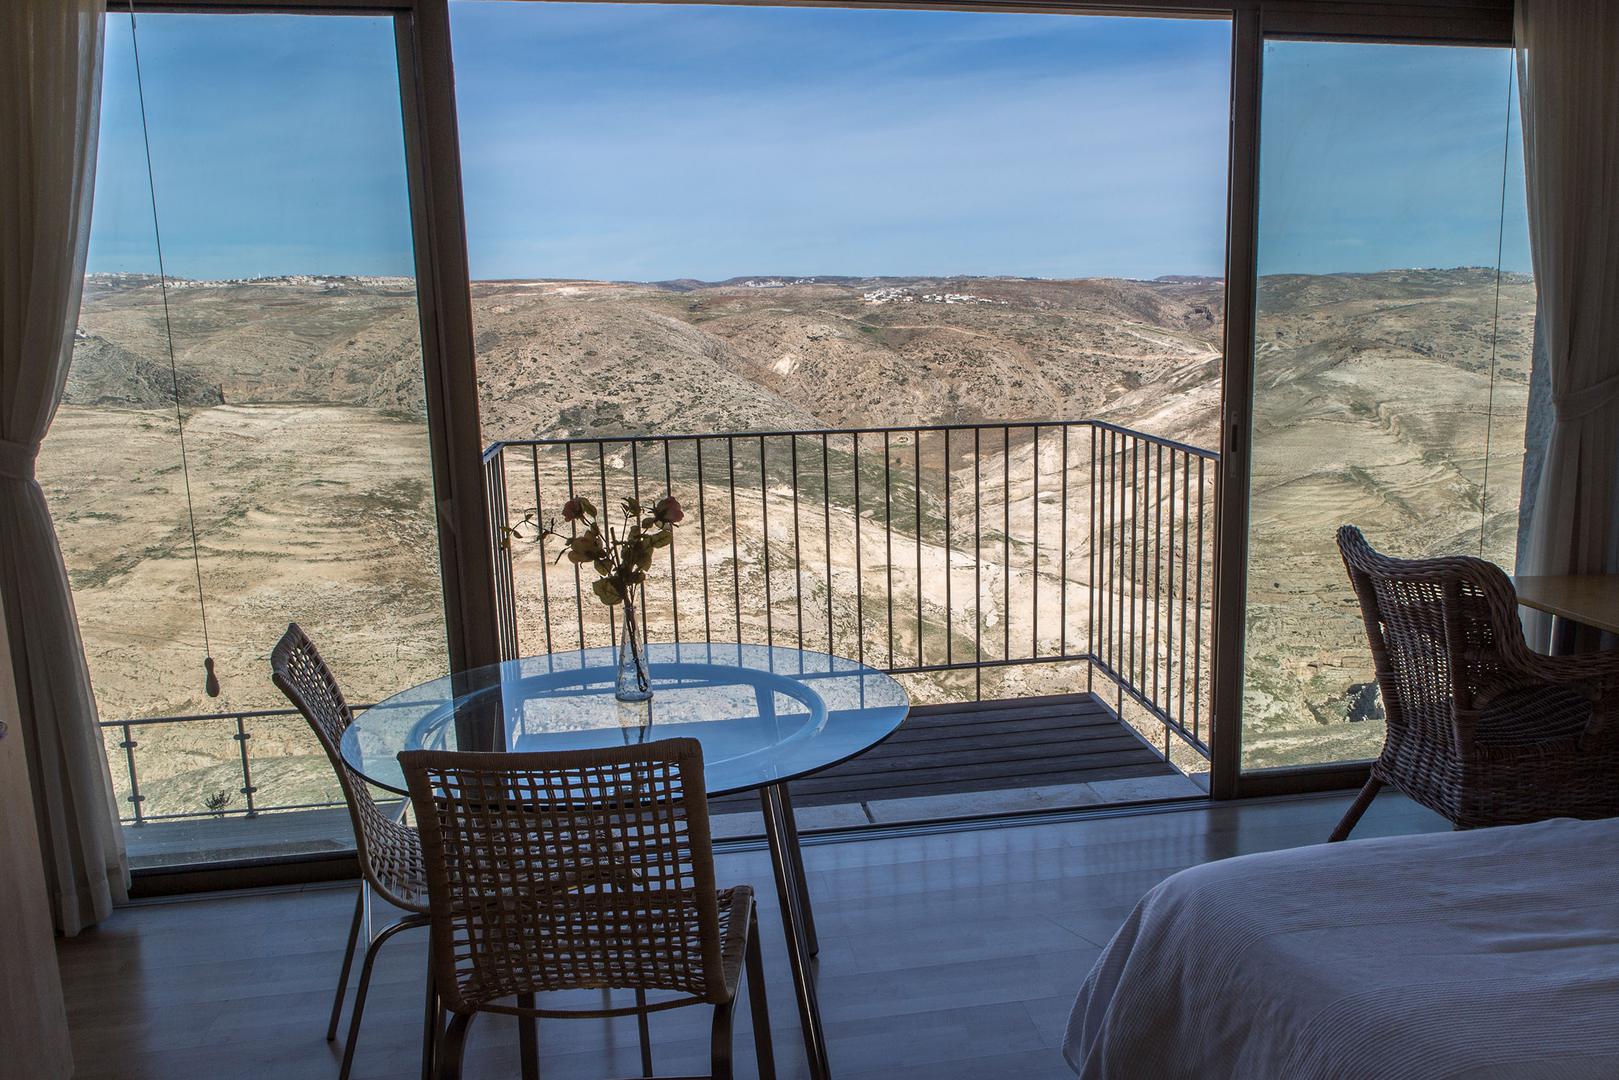 View from inside an Airbnb listing in the Israeli settlement of Nofei Prat in the occupied West Bank.